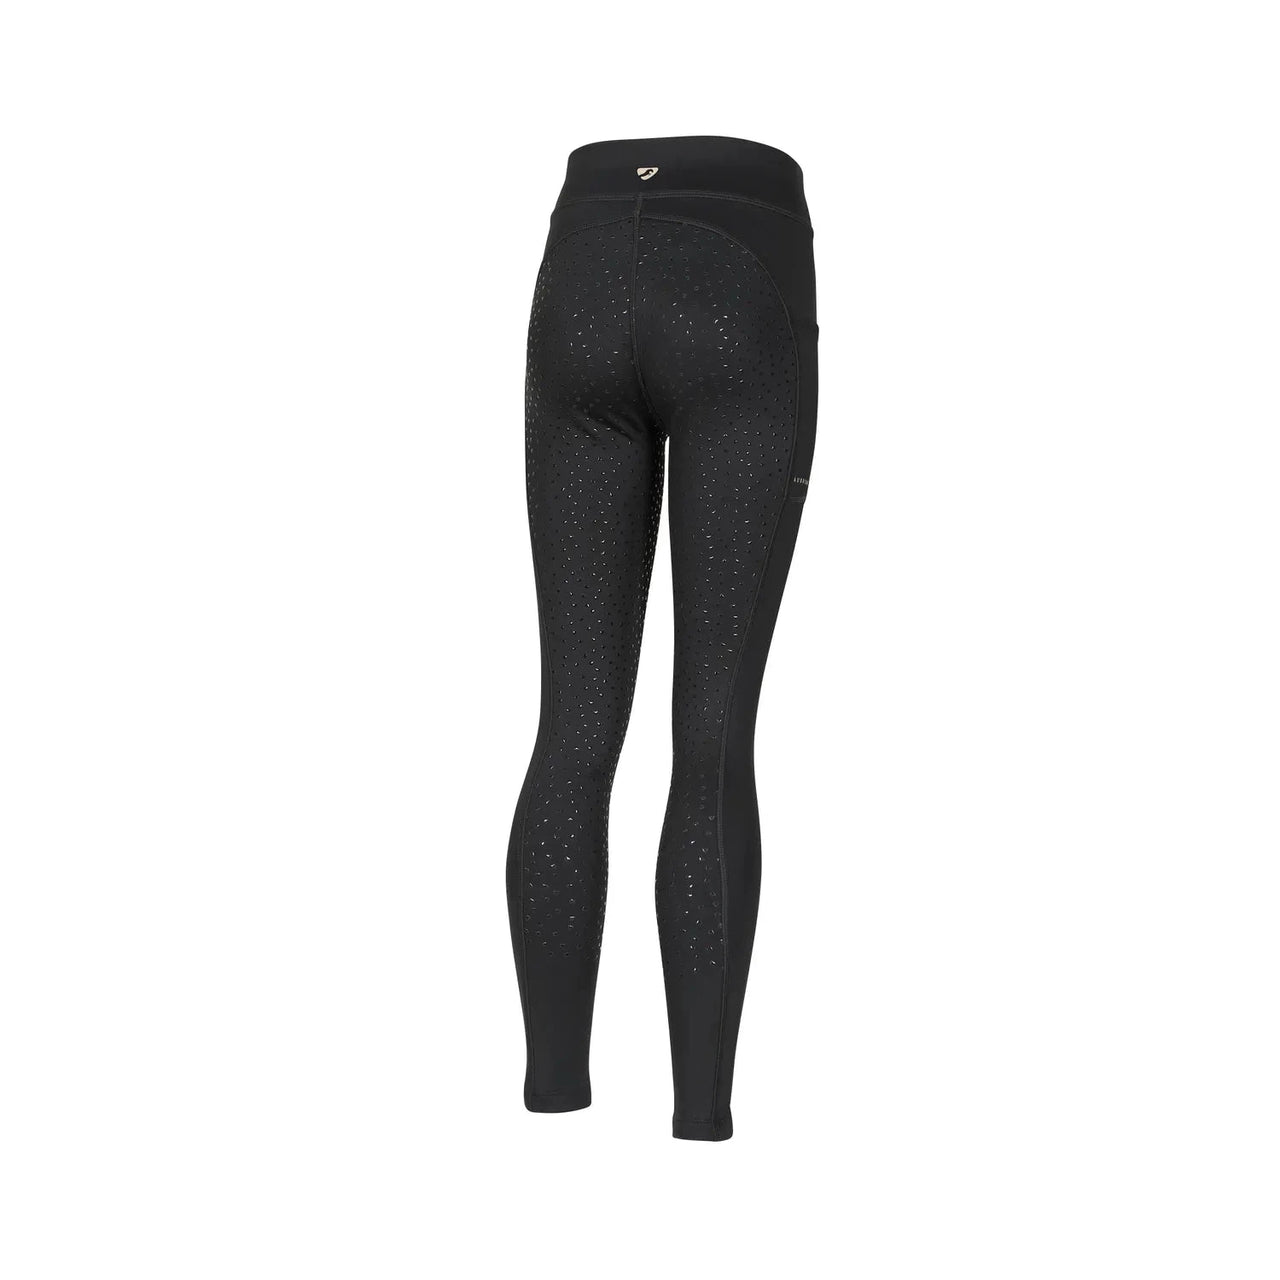 Aubrion Young Rider Shield Winter Tights